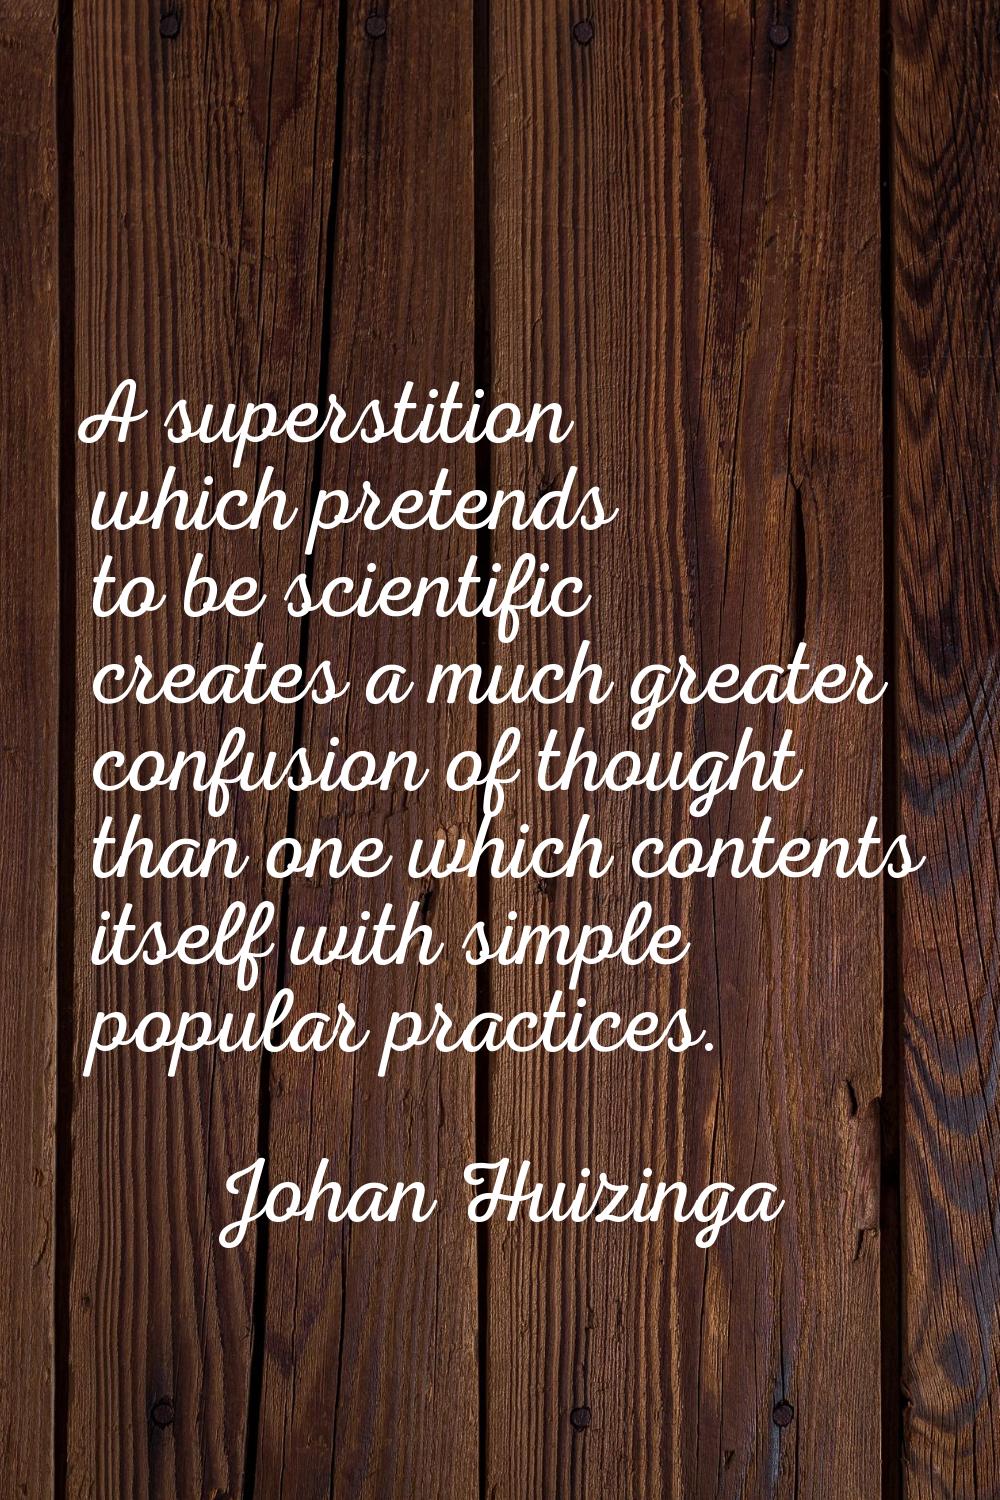 A superstition which pretends to be scientific creates a much greater confusion of thought than one